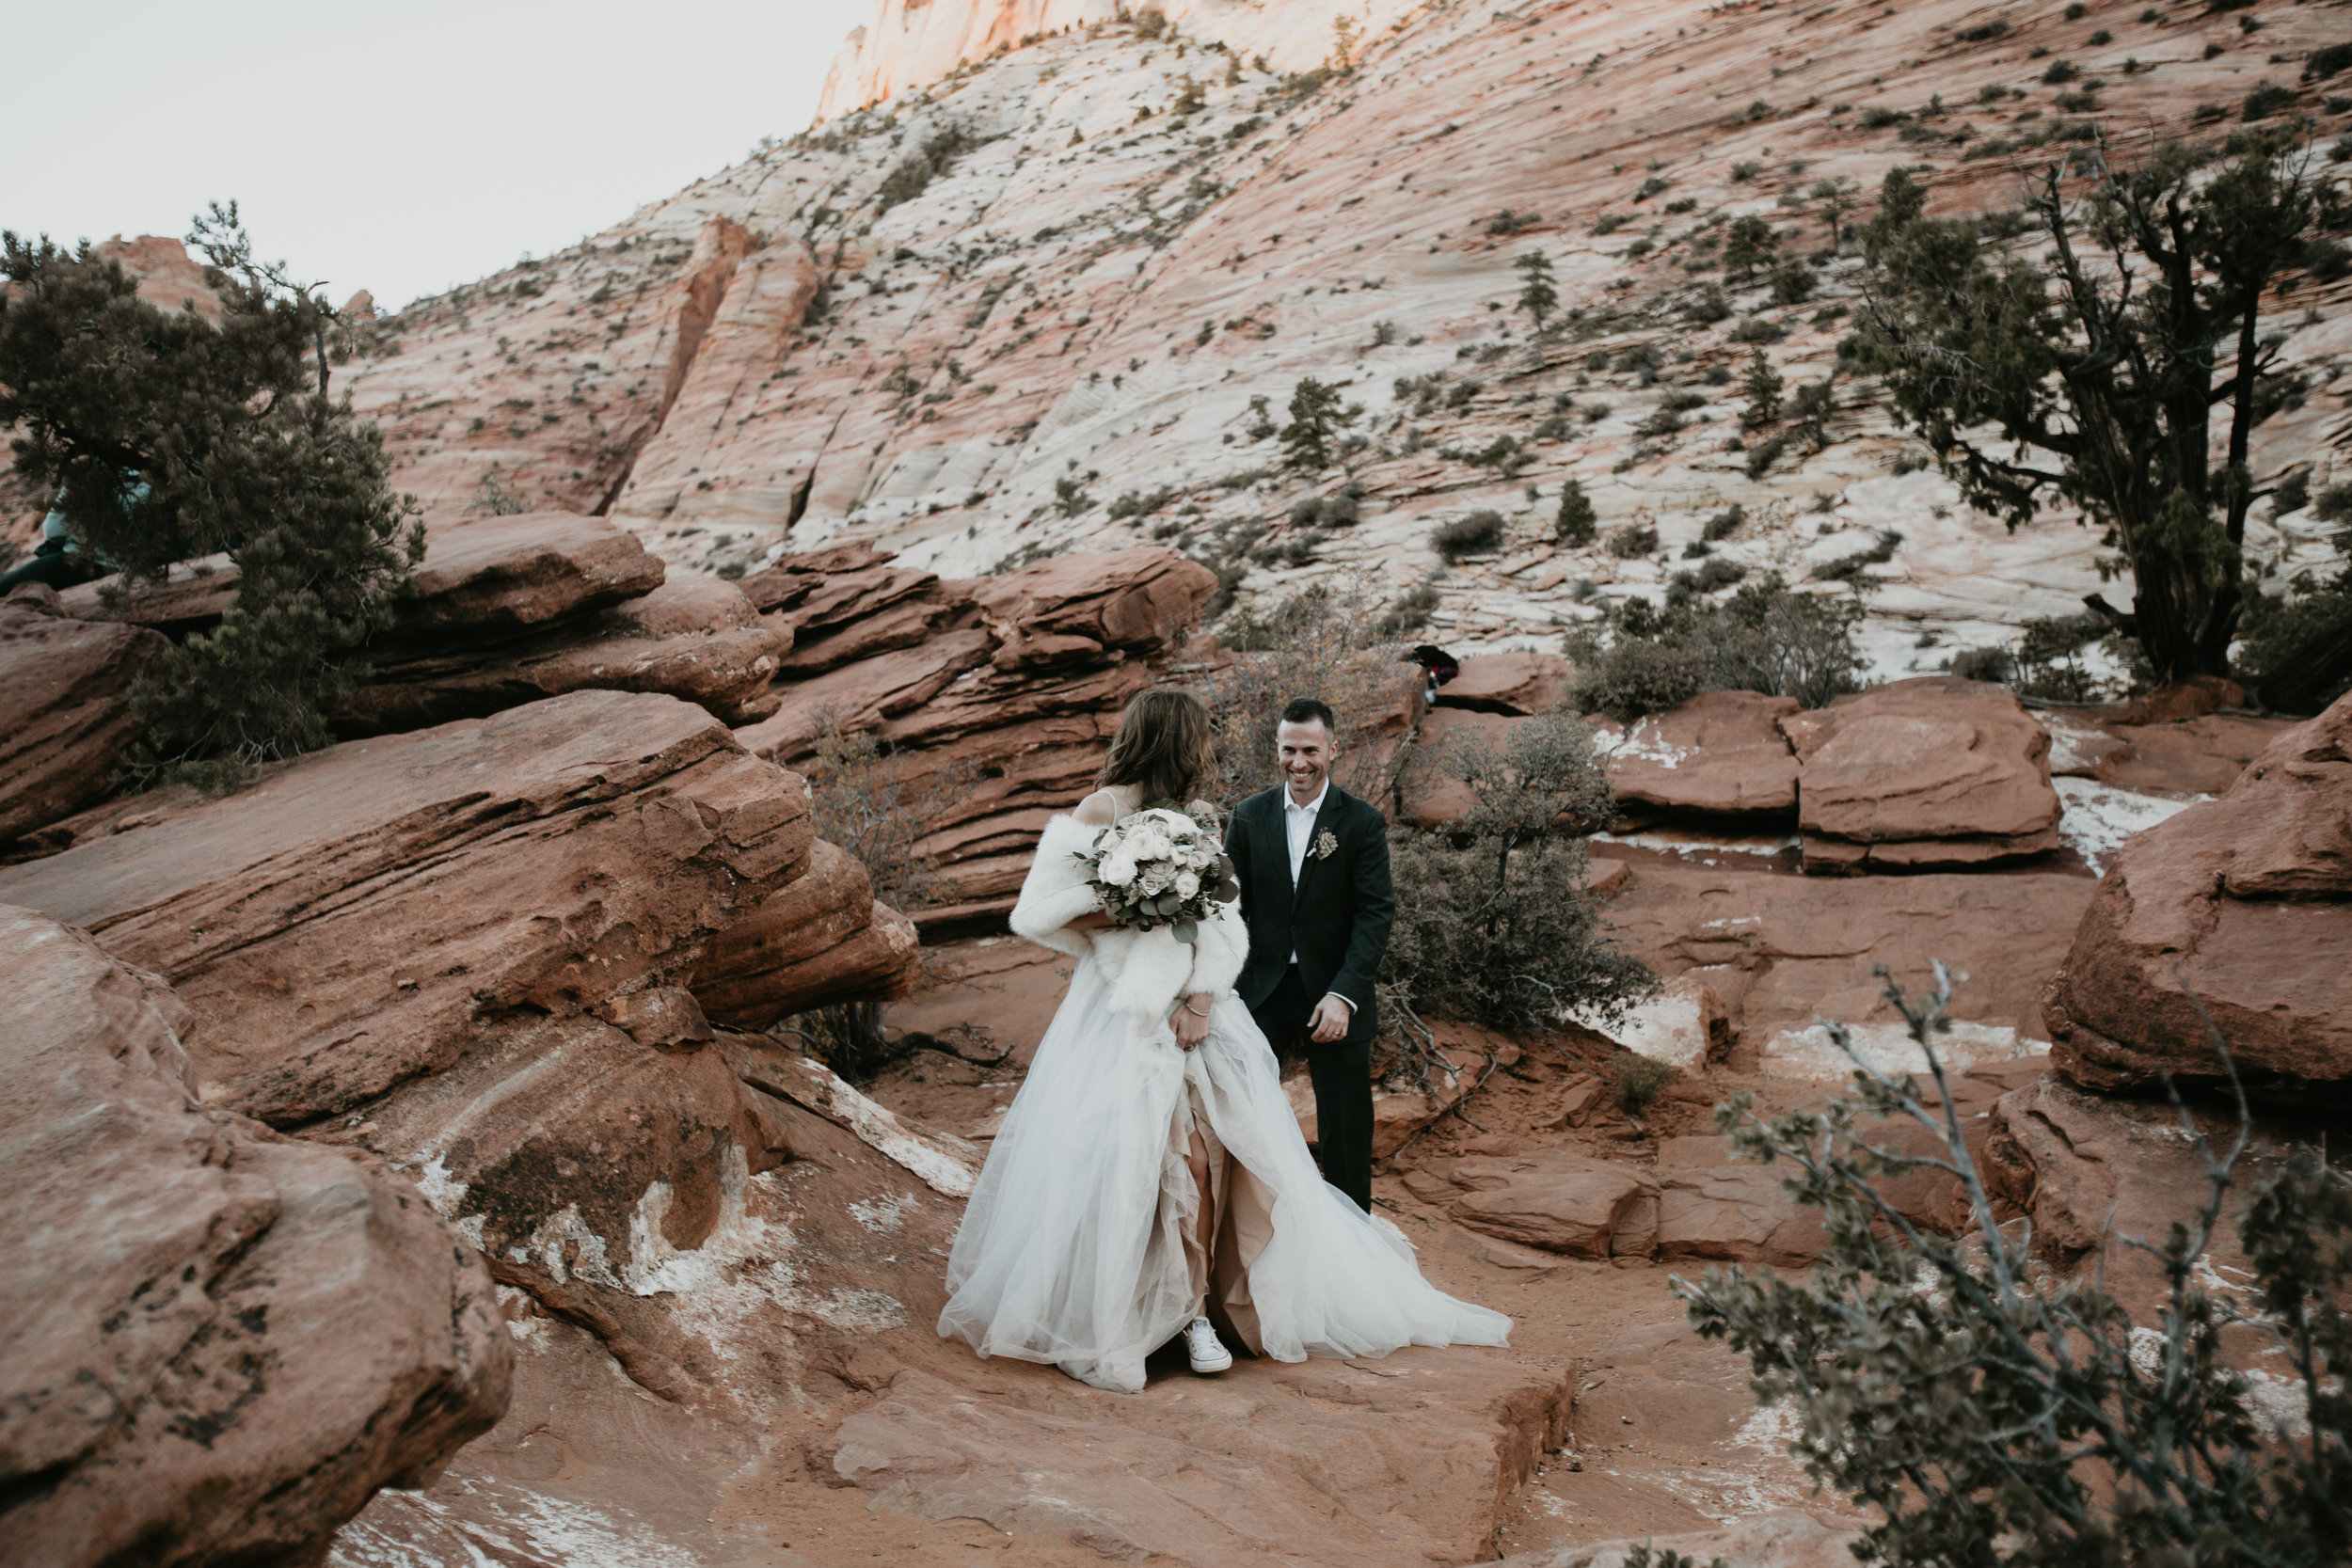 nicole-daacke-photography-zion-national-park-elopement-photographer-canyon-overlook-trail-elope-hiking-adventure-wedding-photos-fall-utah-red-rock-canyon-stgeorge-eloping-photographer-74.jpg